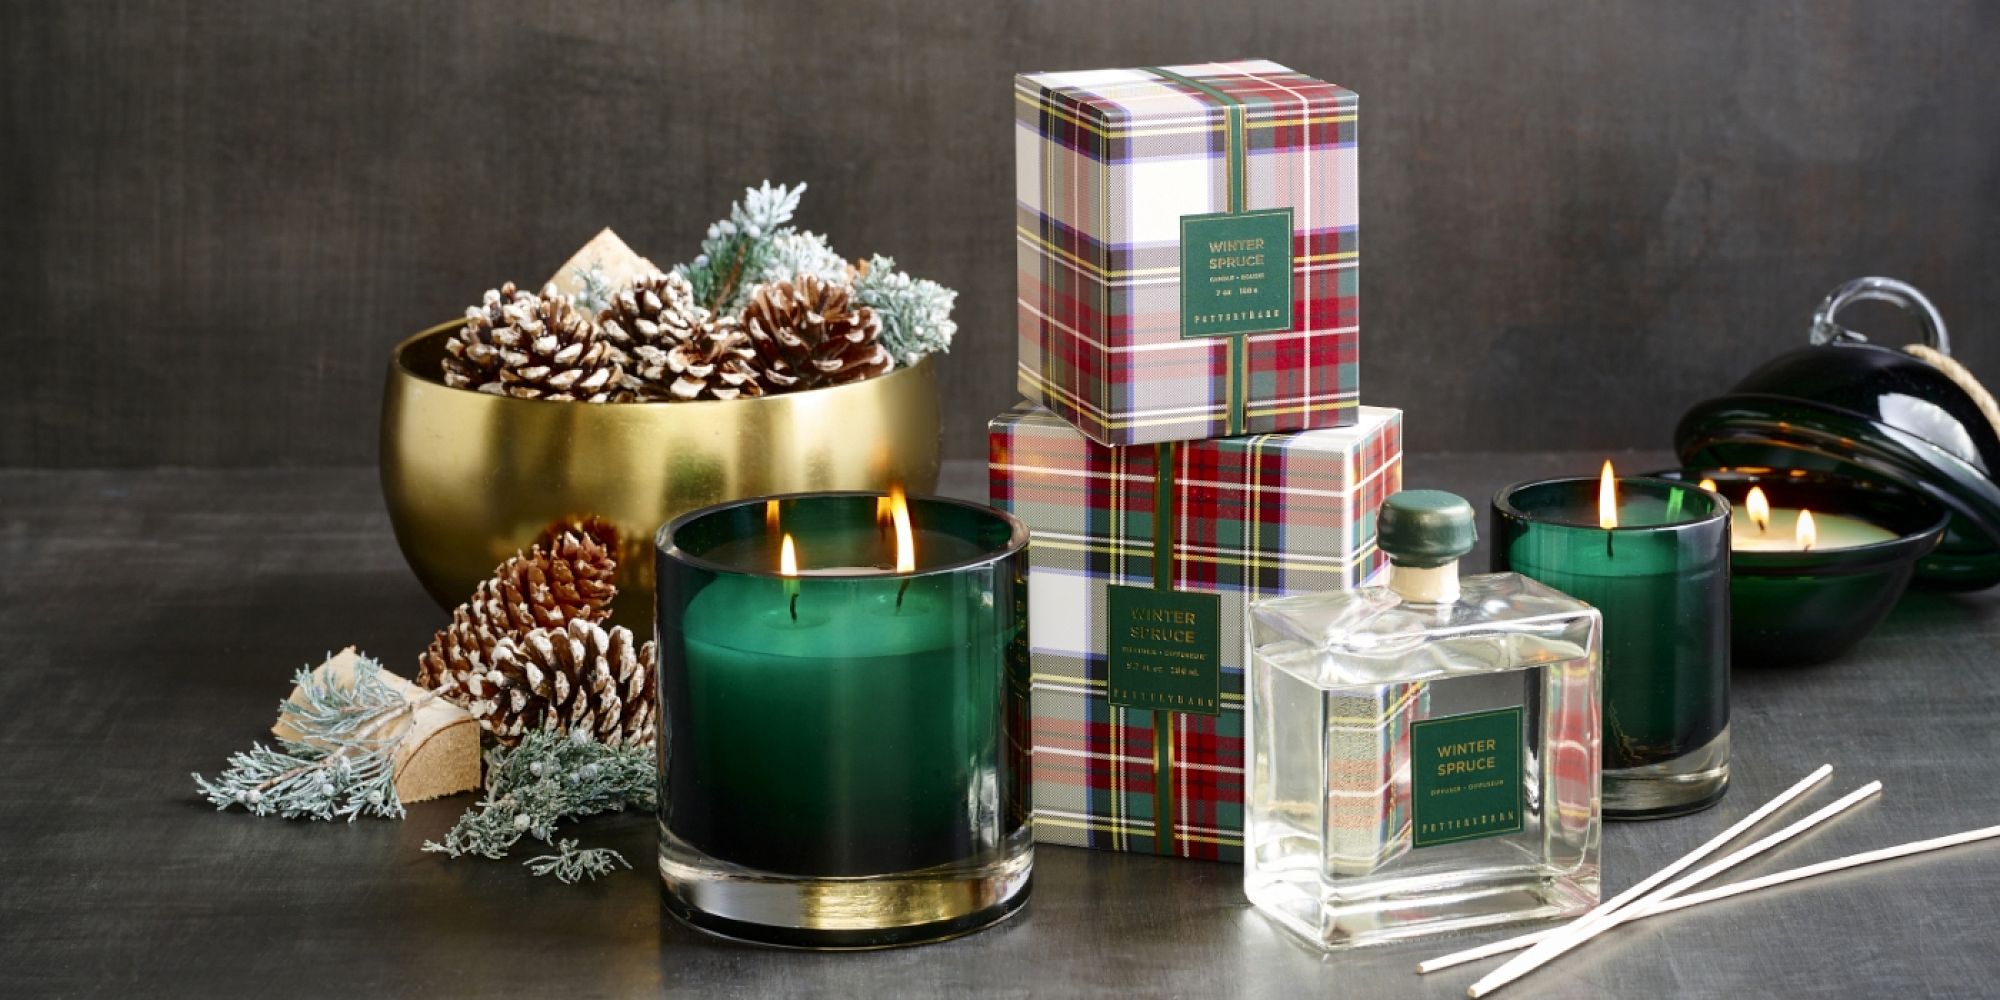 Winter Spruce Scent Collection | Pottery Barn